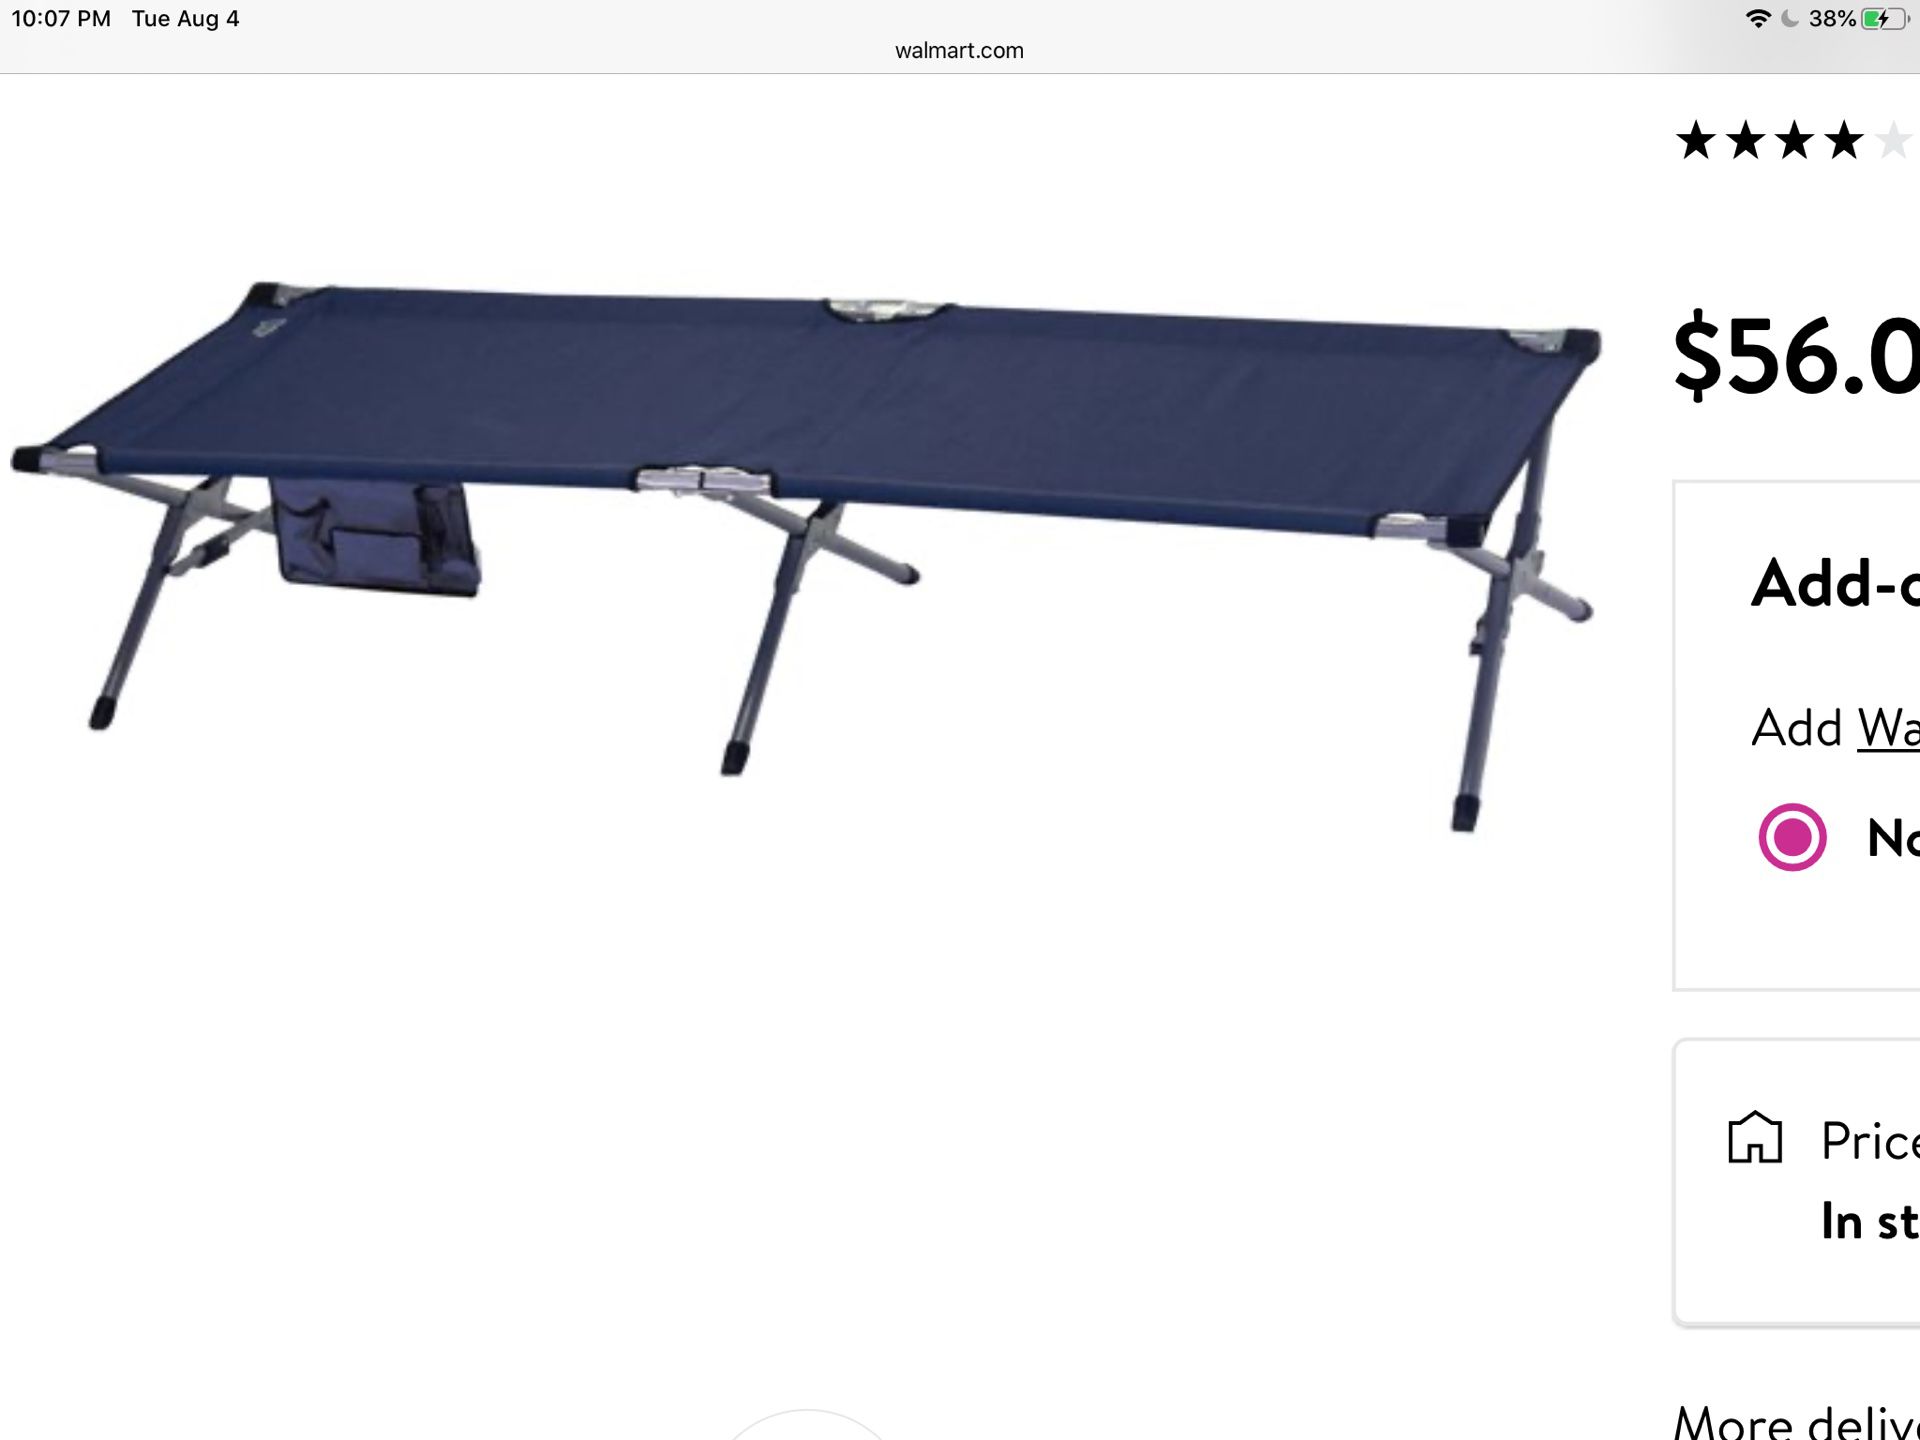 XL camping cot for adults - new